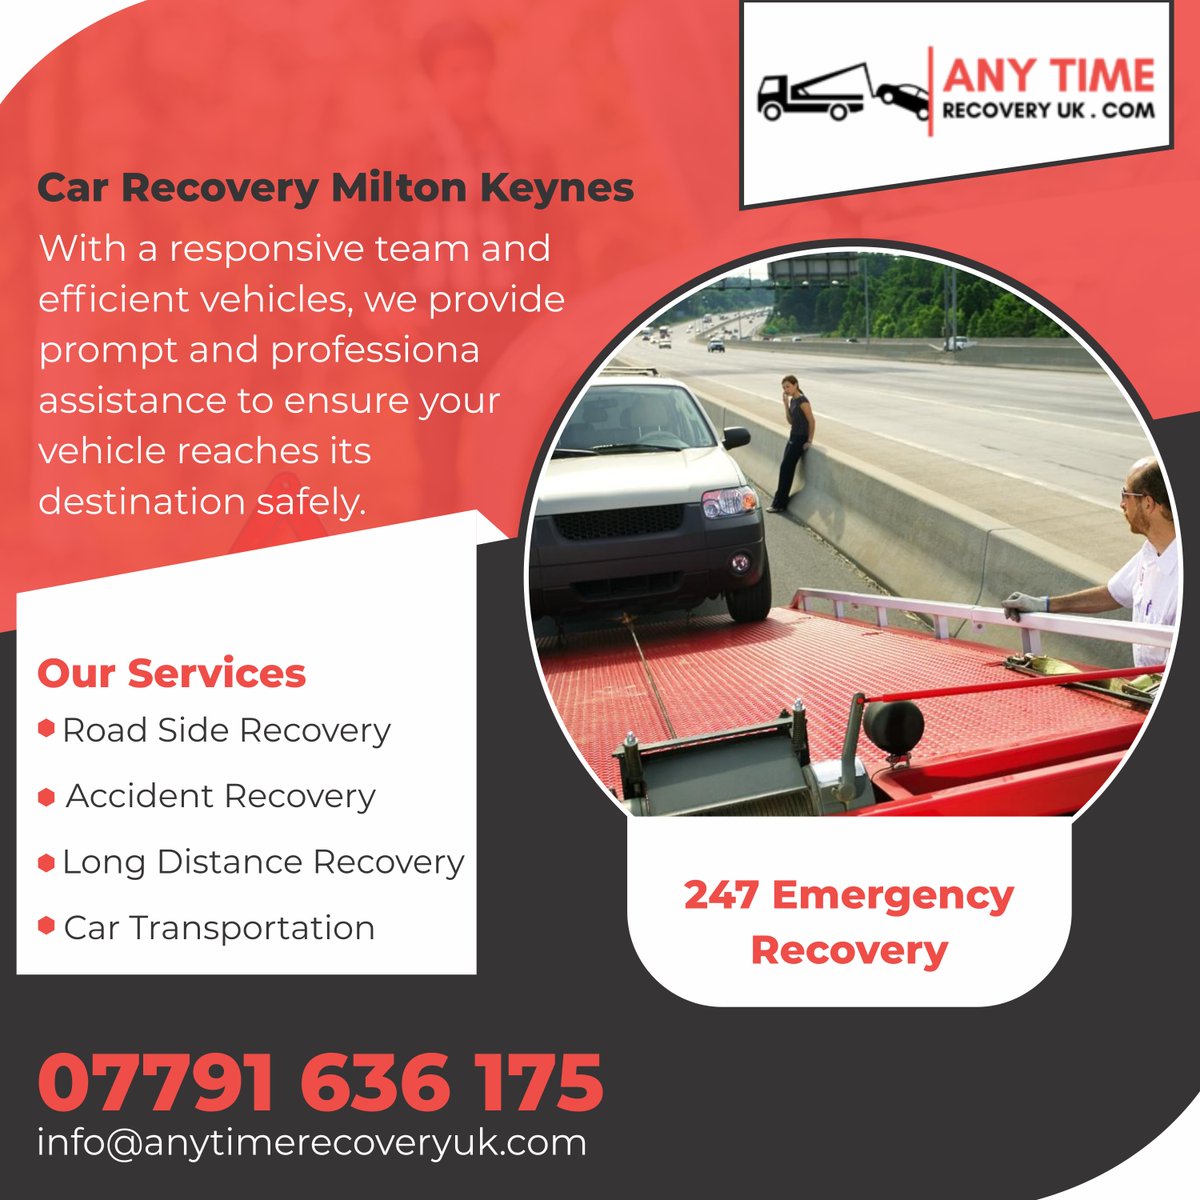 Anytime Recovery offers swift and reliable car recovery services in Milton Keynes, United Kingdom. Trust us for efficient and professional assistance whenever you need it.

anytimerecoveryuk.com
#AnytimeRecovery
#MiltonKeynesRecovery
#CarRescueMK
#EmergencyRecovery